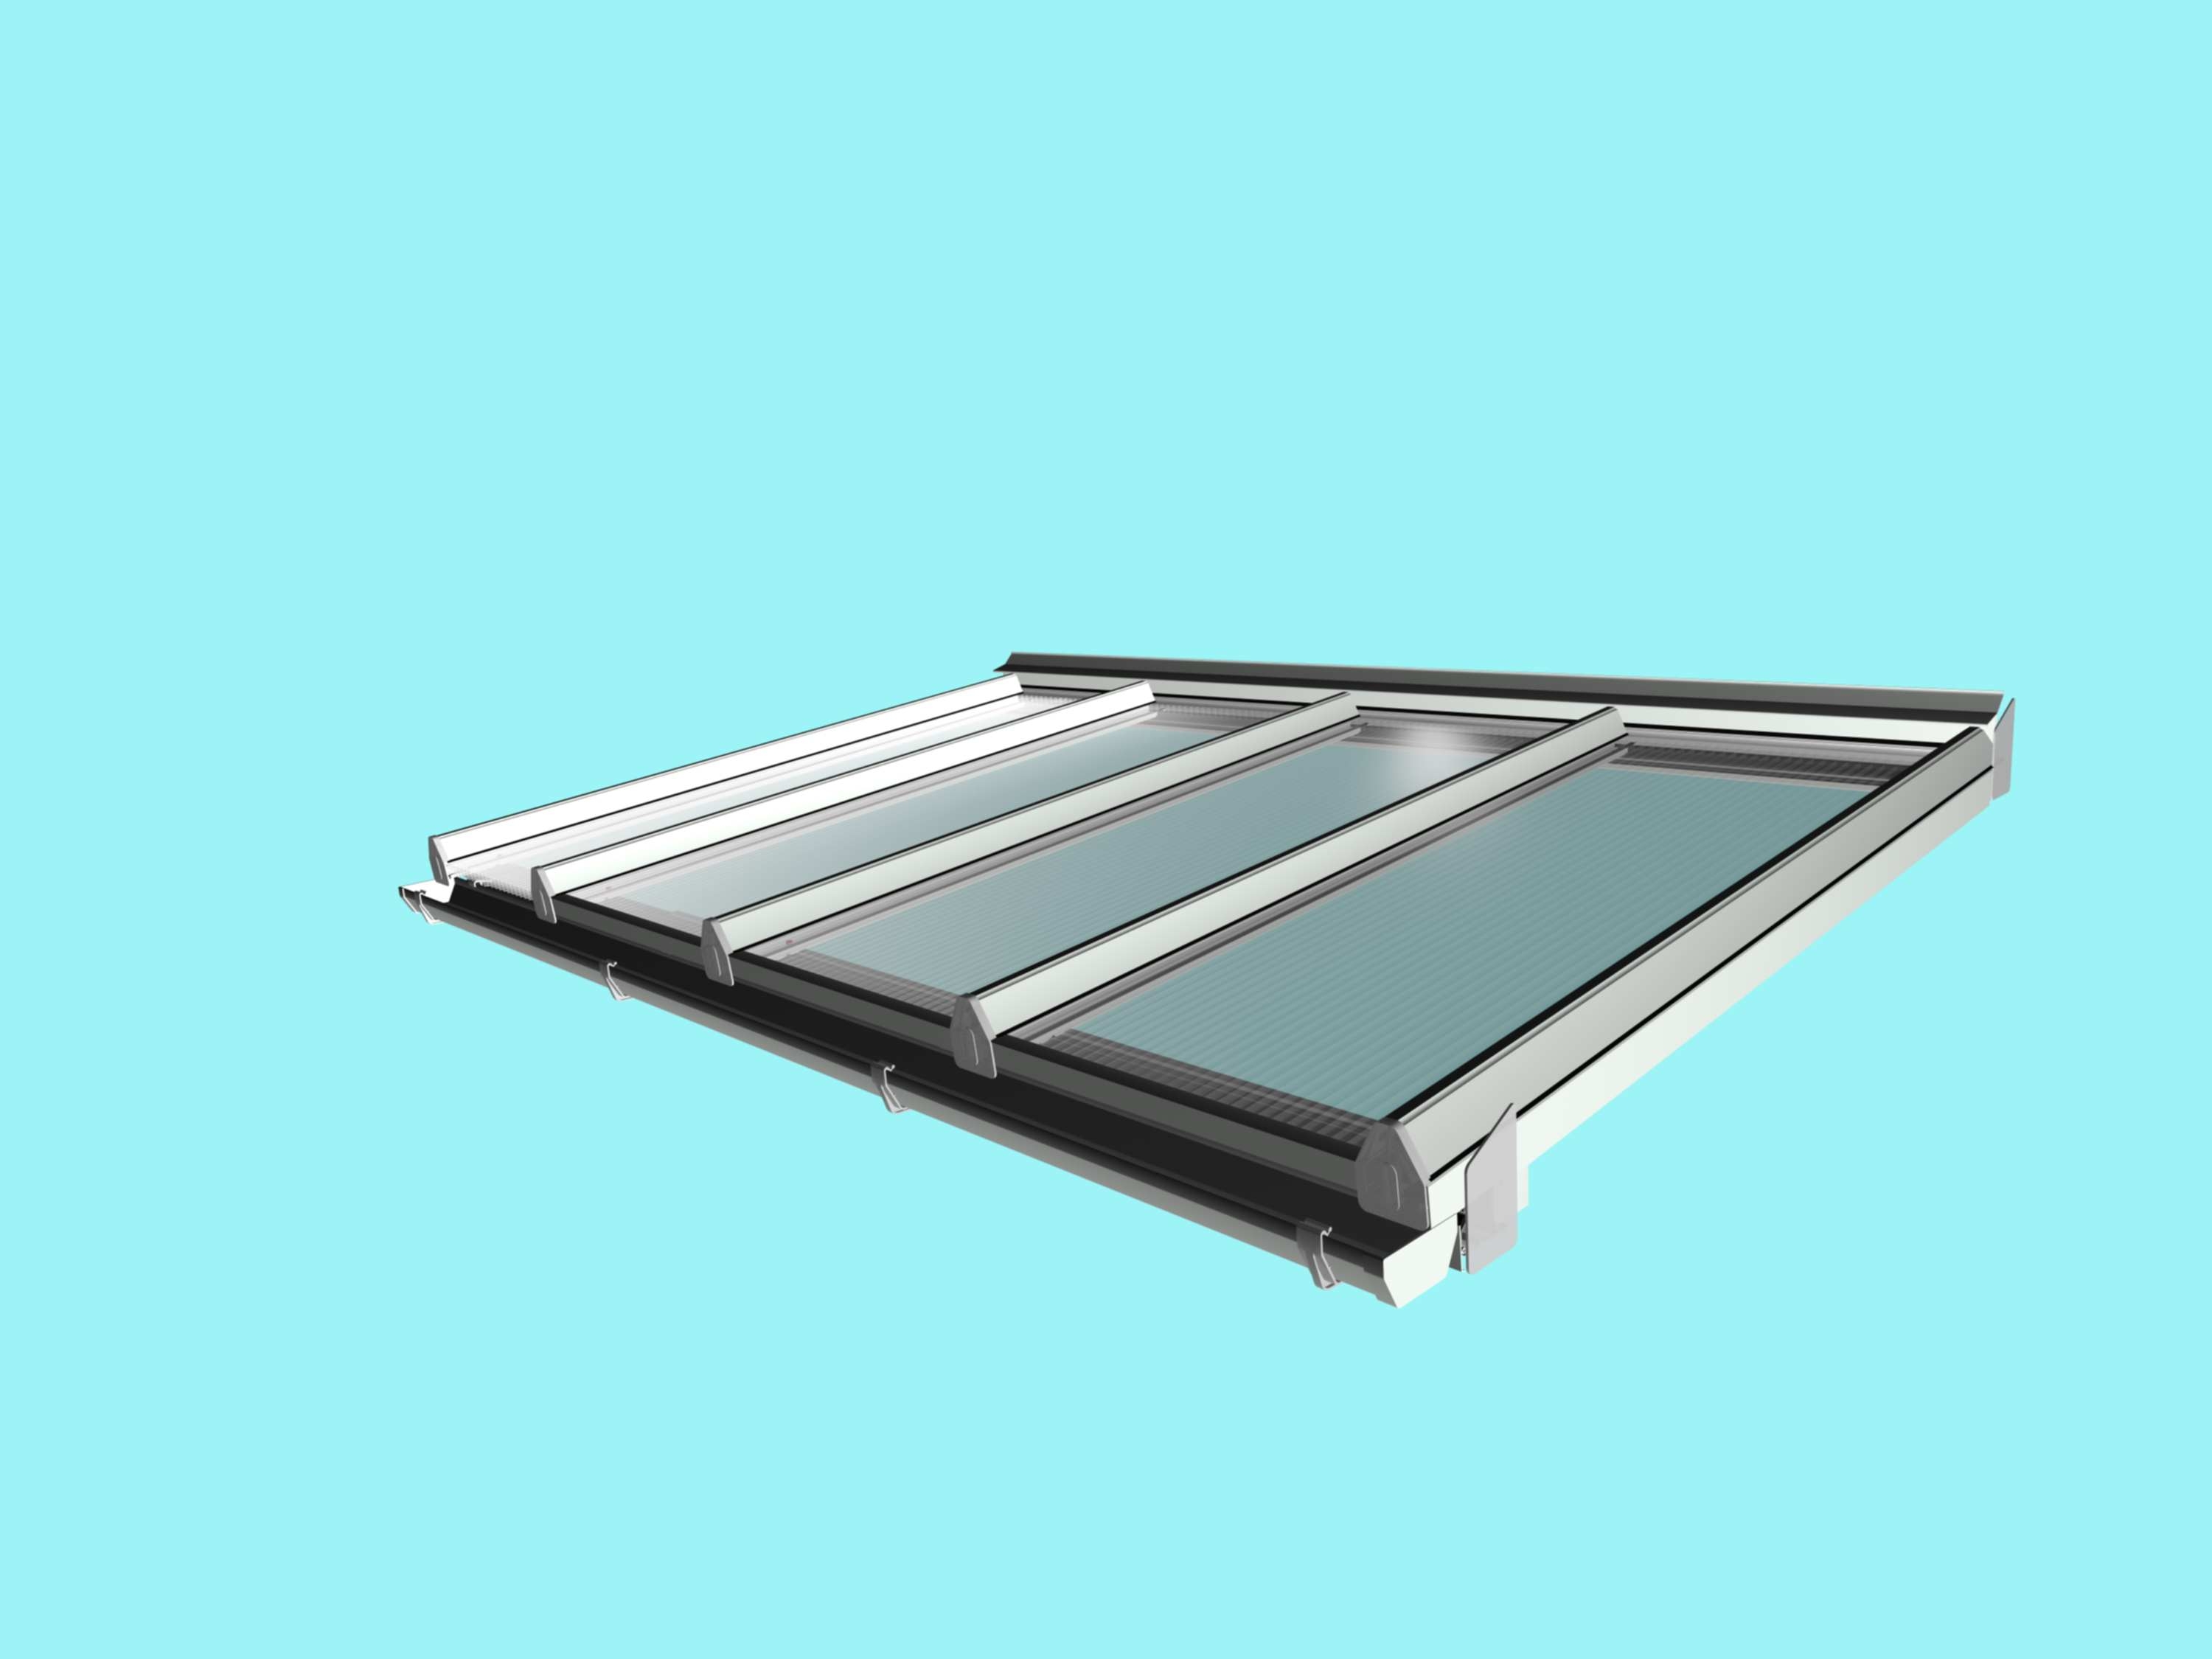 Self-Supporting DIY Conservatory Roof Kit for 16mm polycarbonate, 3.0m wide x 2.5m Projection from Omega Build